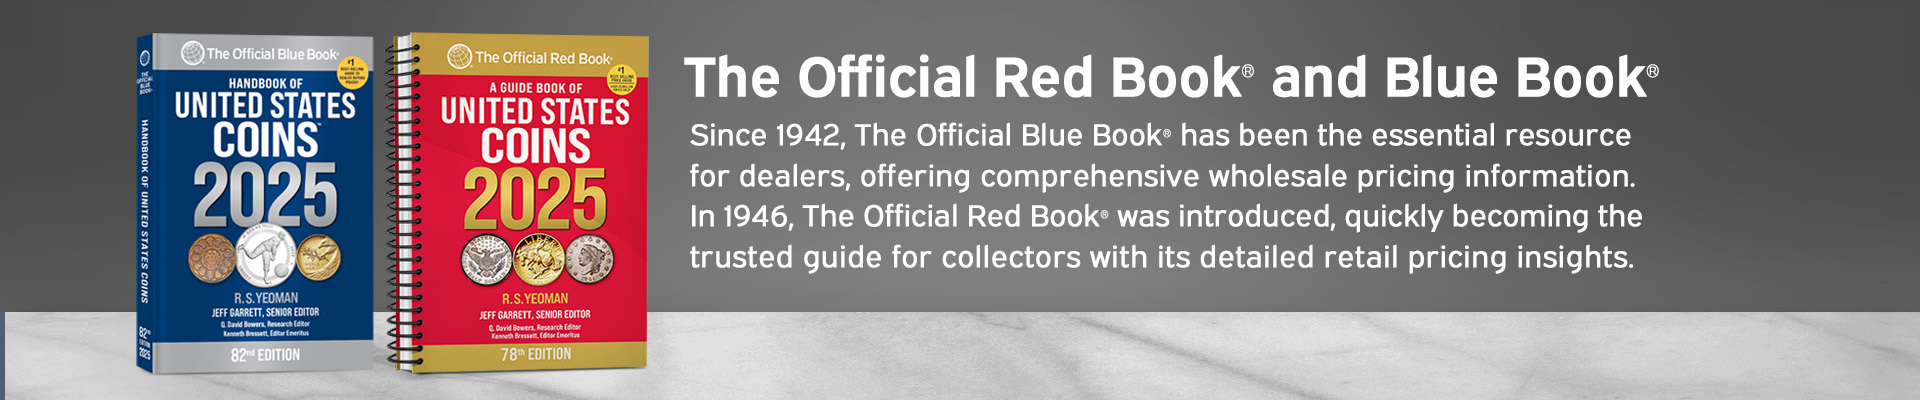 The Official Red Book and Blue Book